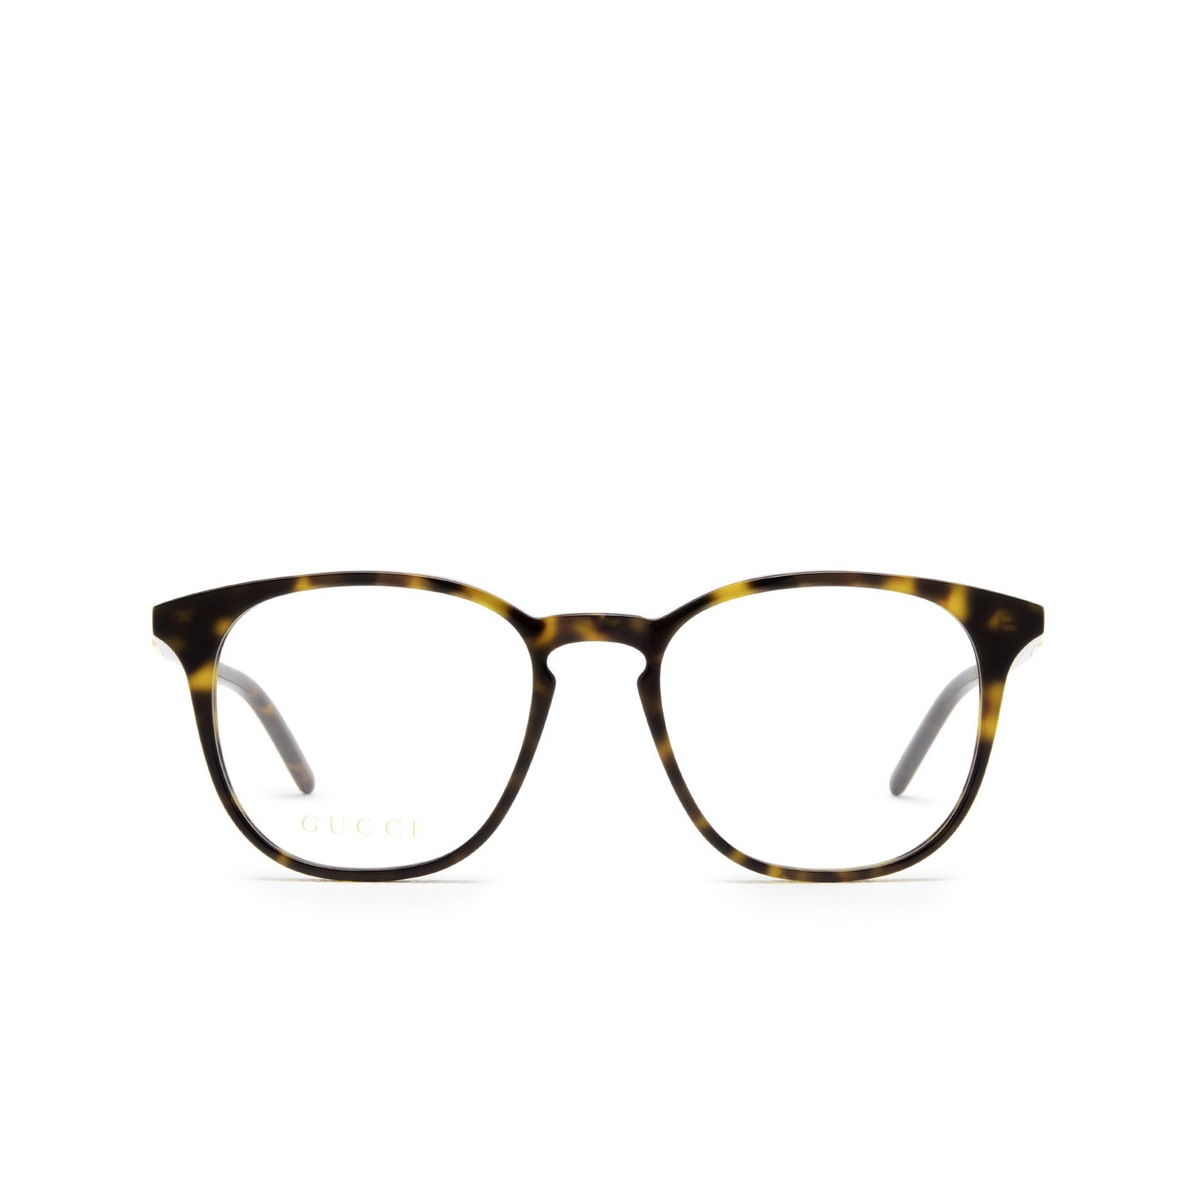 Gucci® Square Eyeglasses: GG1157O color Havana 006 - front view.